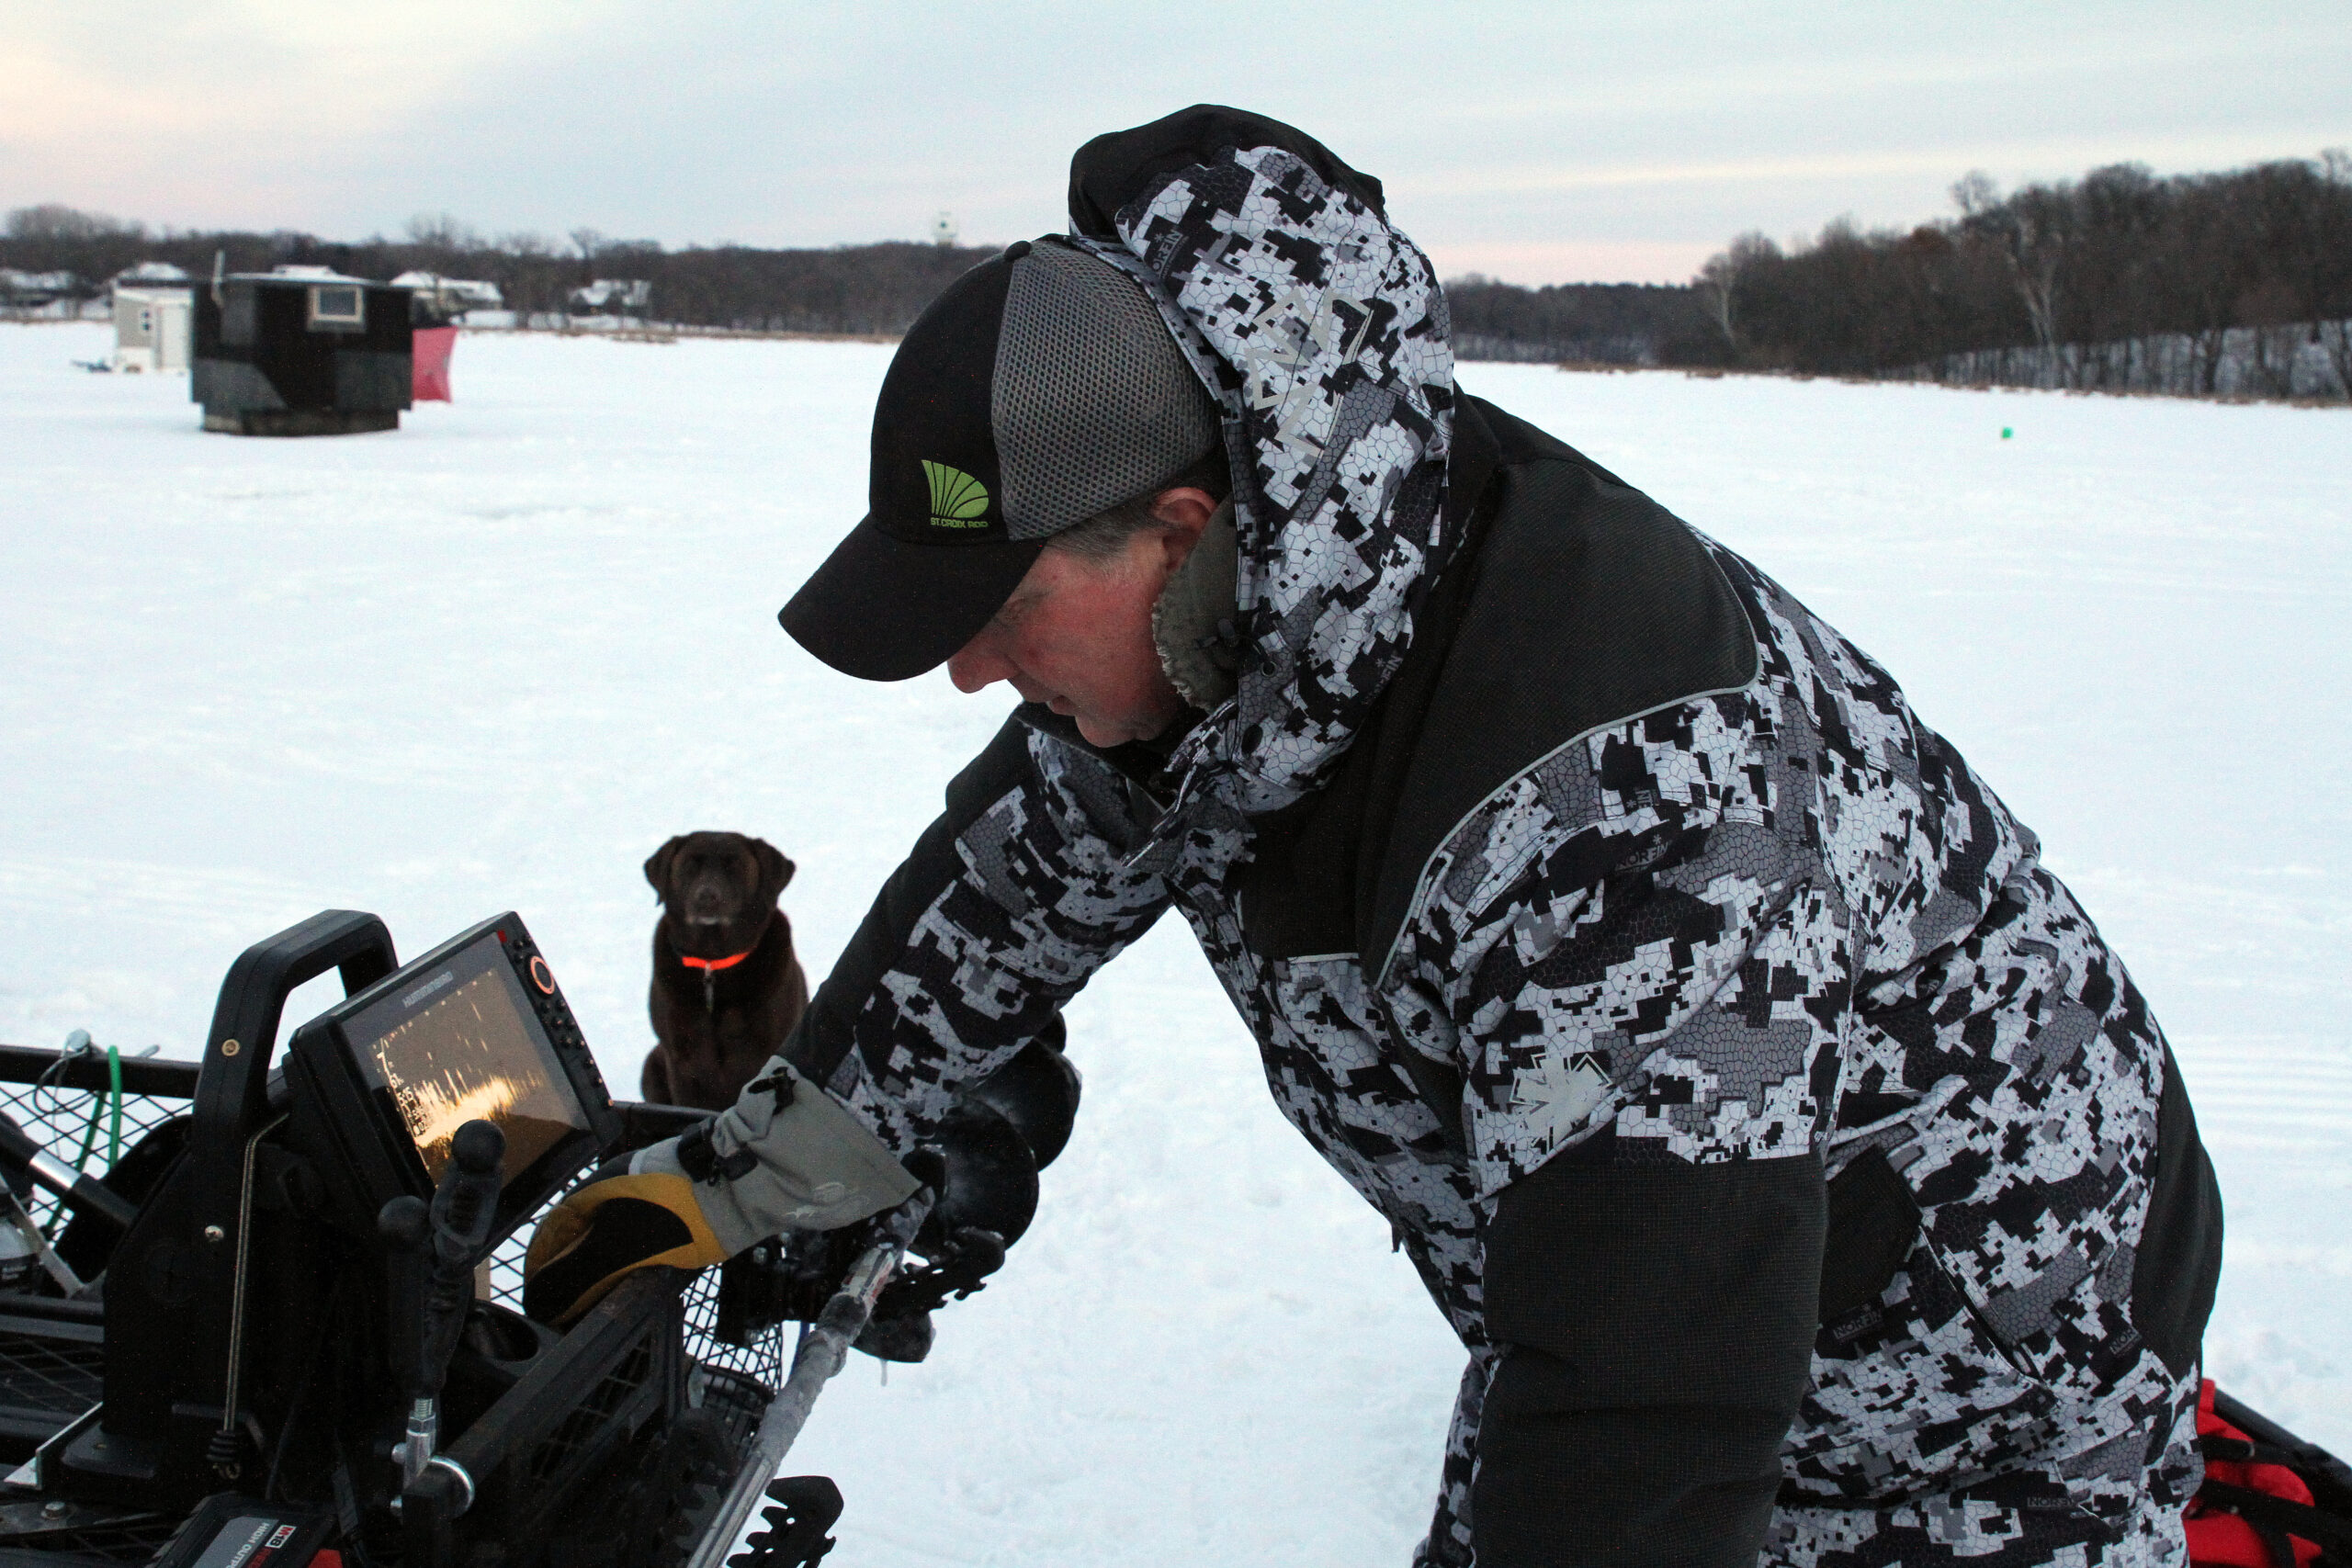 The Norfin heated ice fishing suit